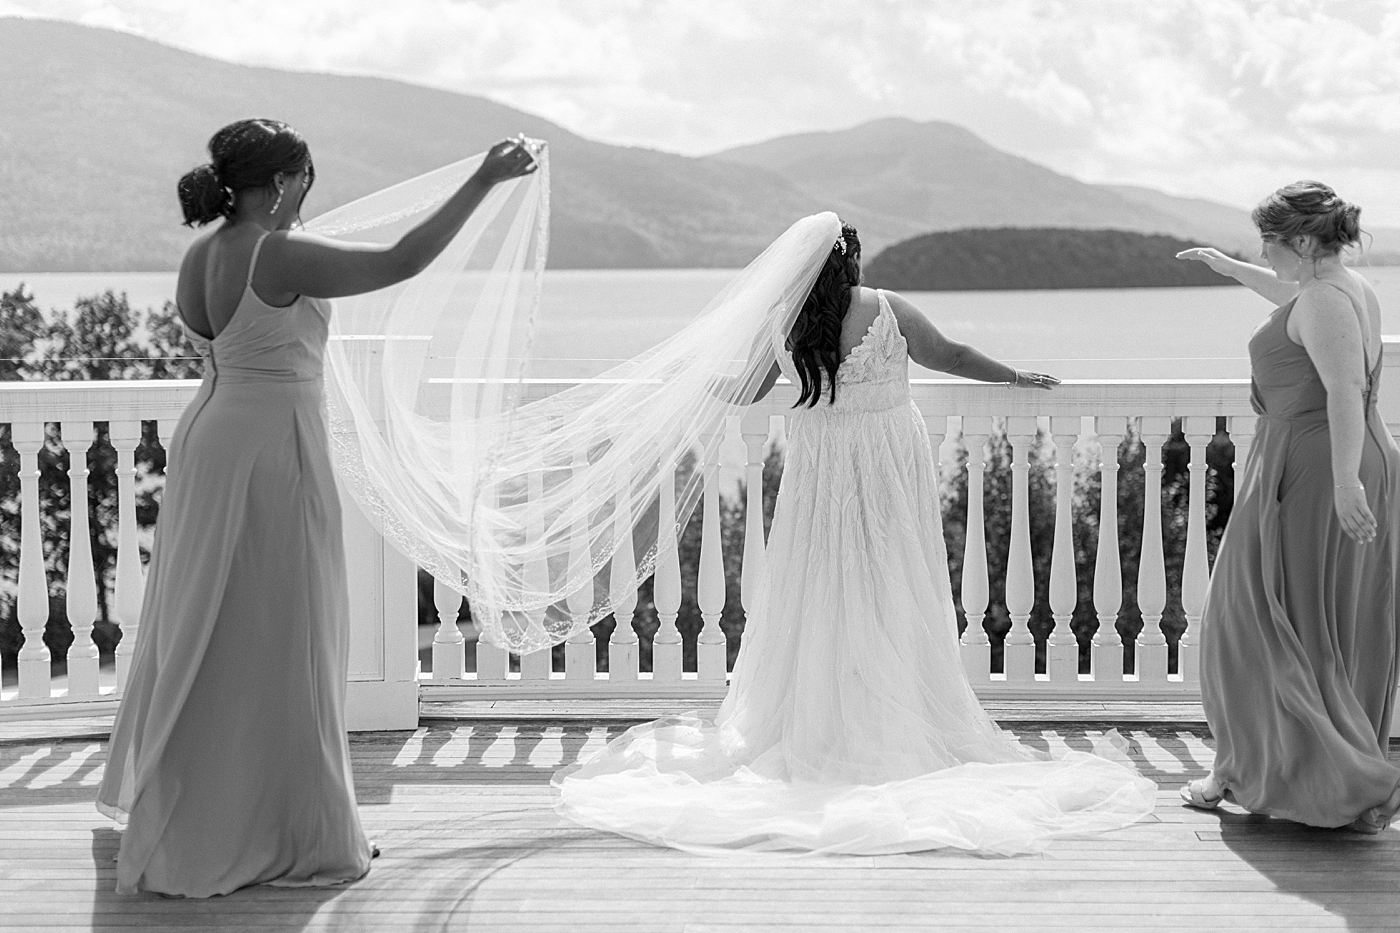 Black and white image of a bridesmaids helping a bride get her vail ready for wedding portraits | Image by Hope Helmuth Photography